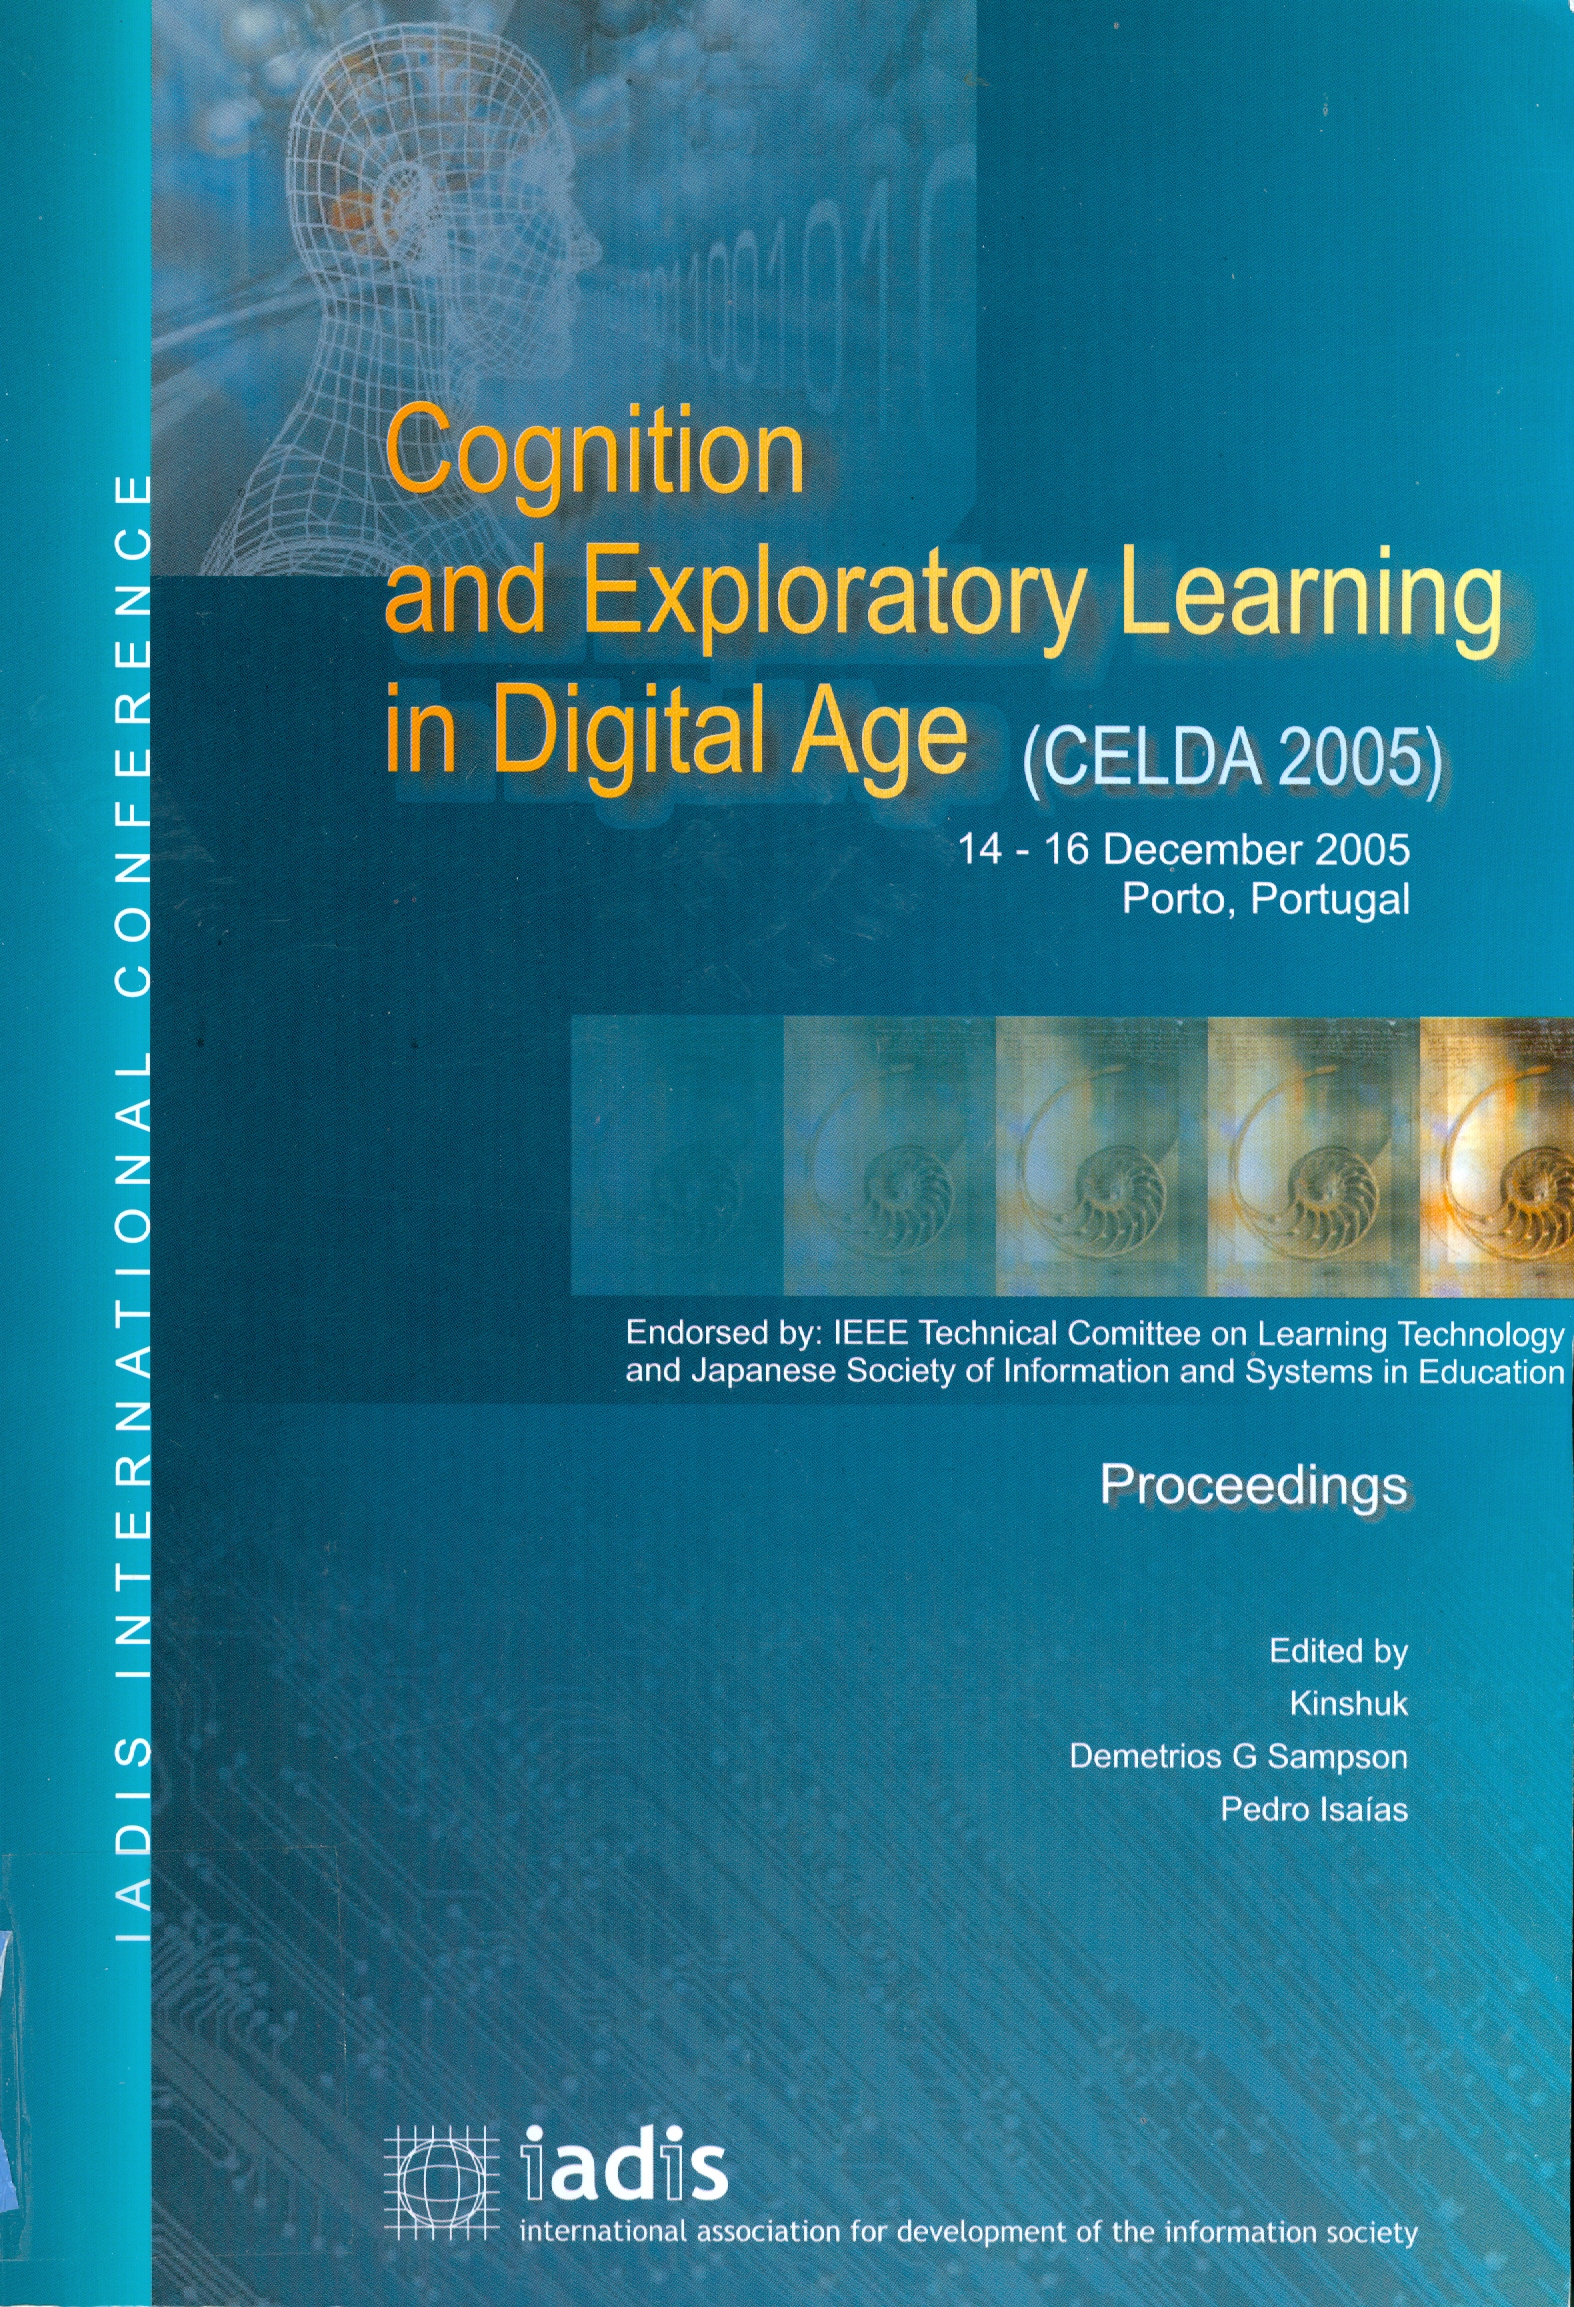 Imagen de portada del libro Proceedings of the IADIS International Conference on Cognition and Exploratory Learning in Digital Age (CELDA 2005)